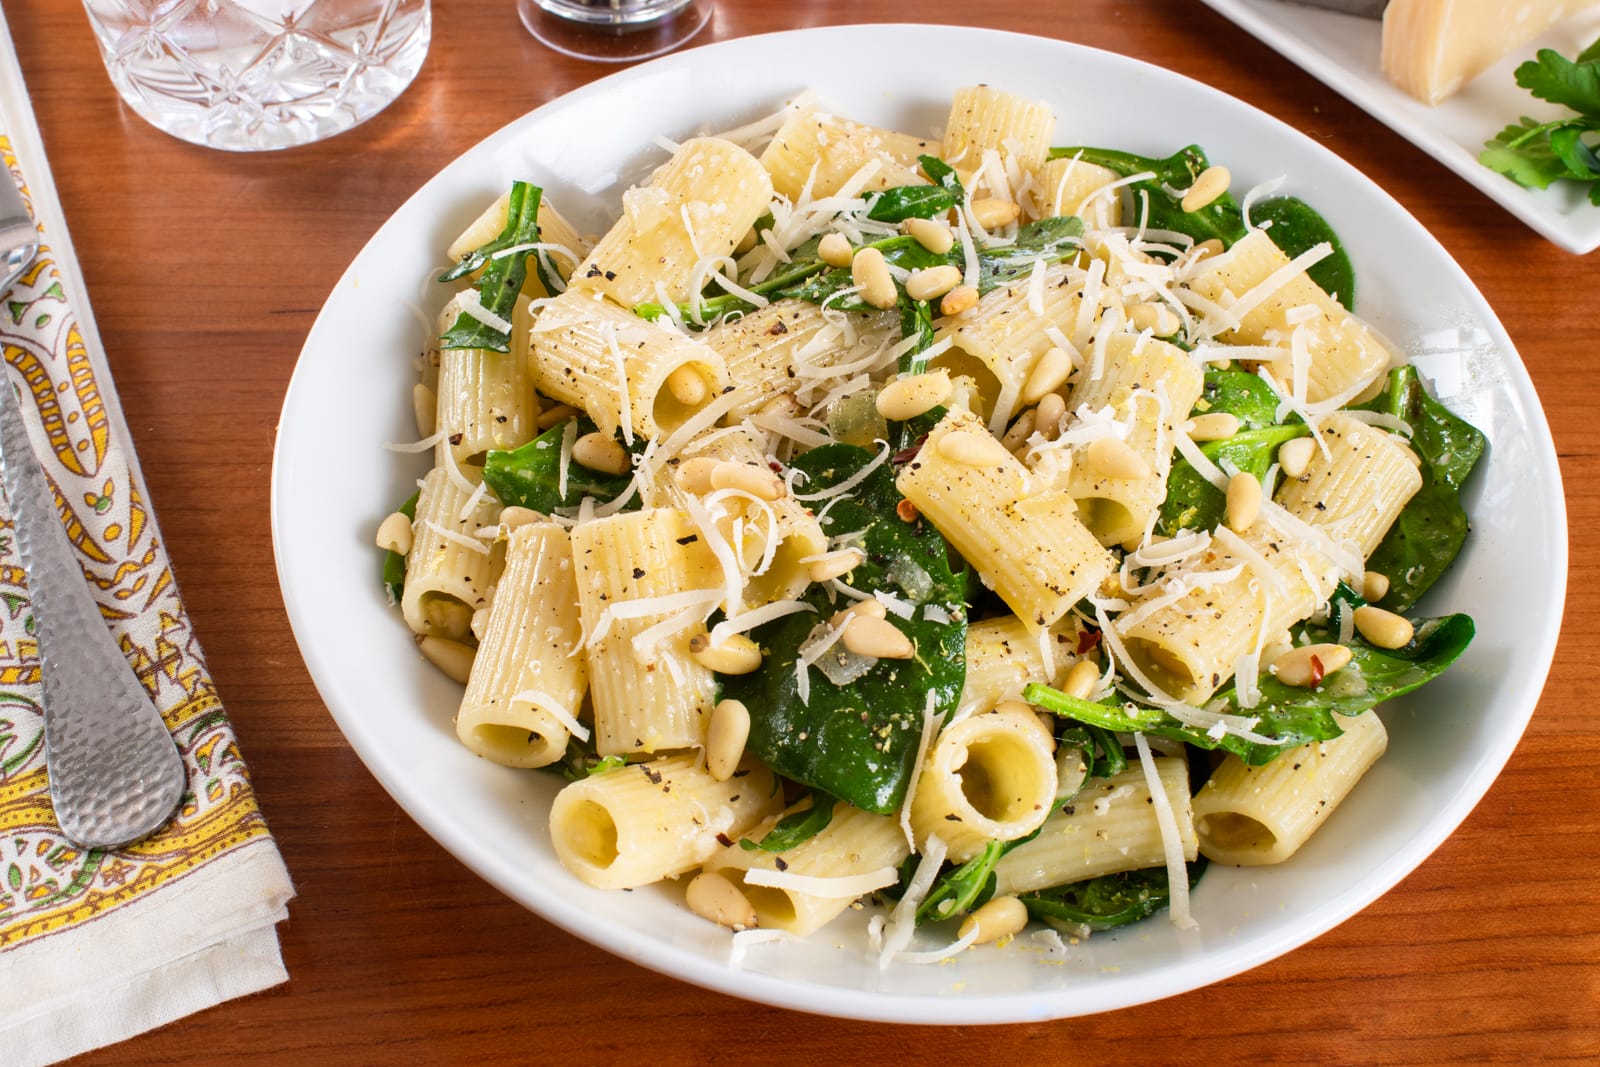 Lemony Rigatoni with Spinach, Arugula, and Pine Nuts